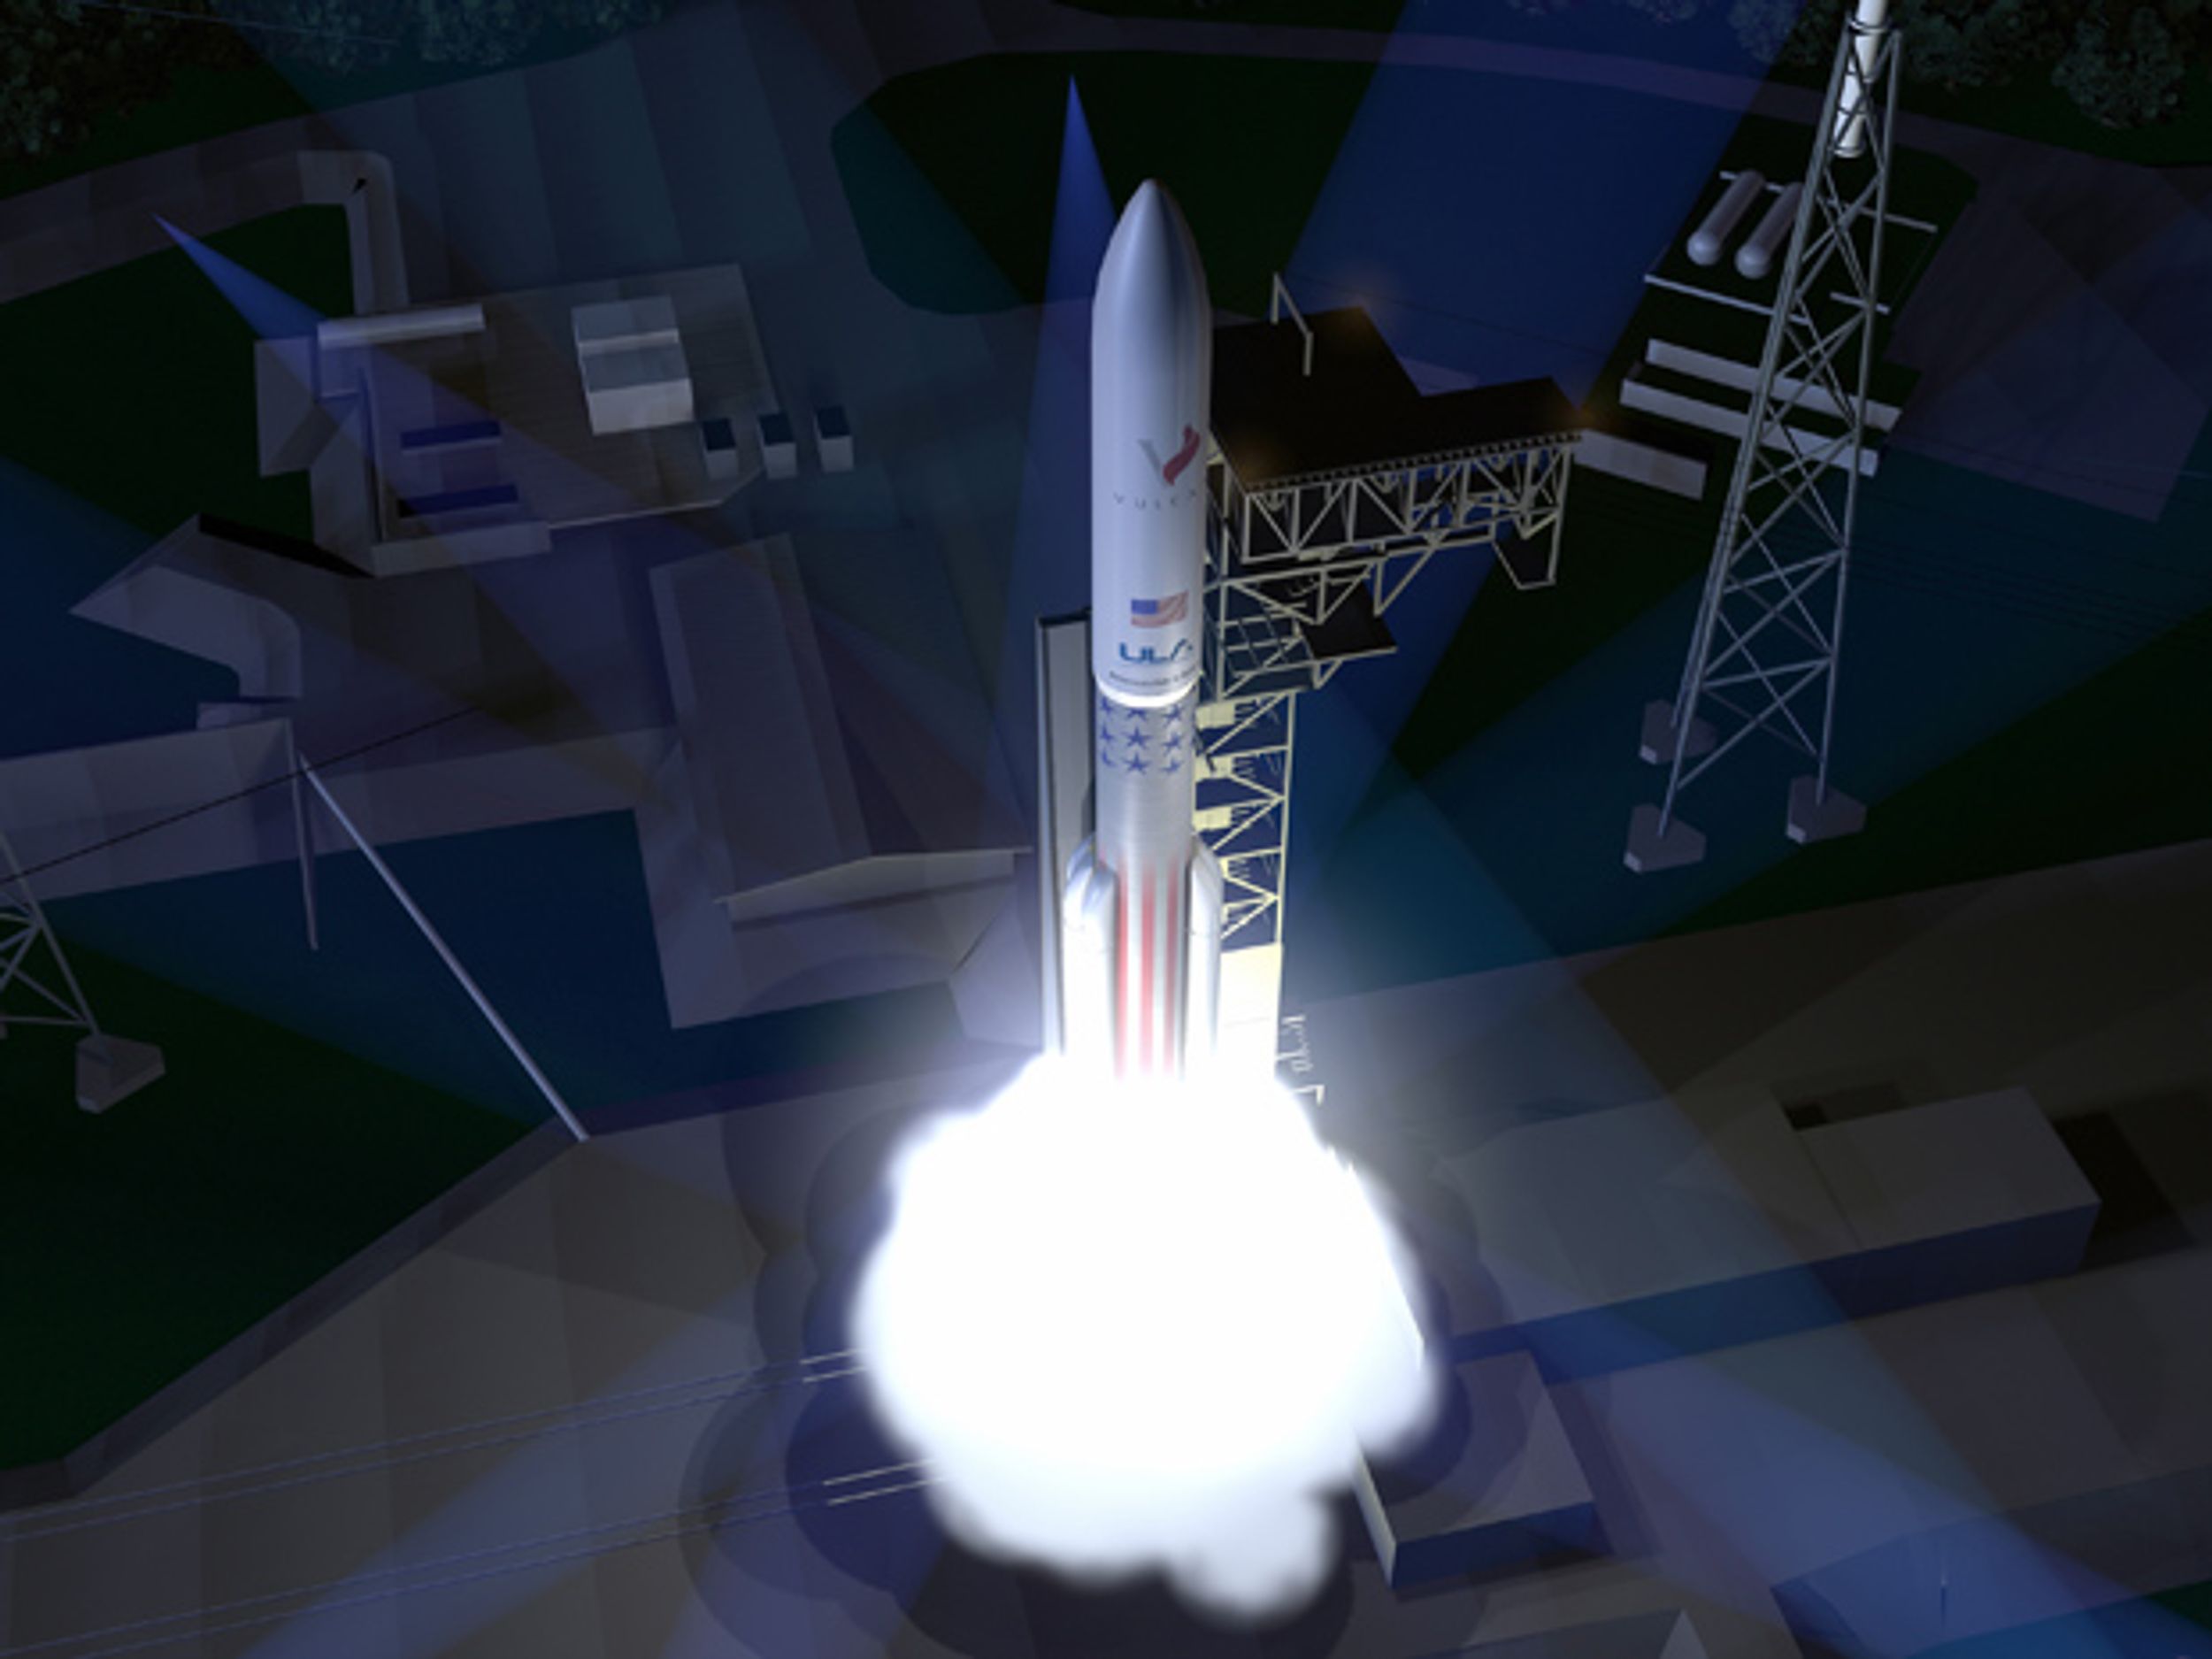 ULA's New Vulcan Rocket Comes Back to Earth via Helicopter